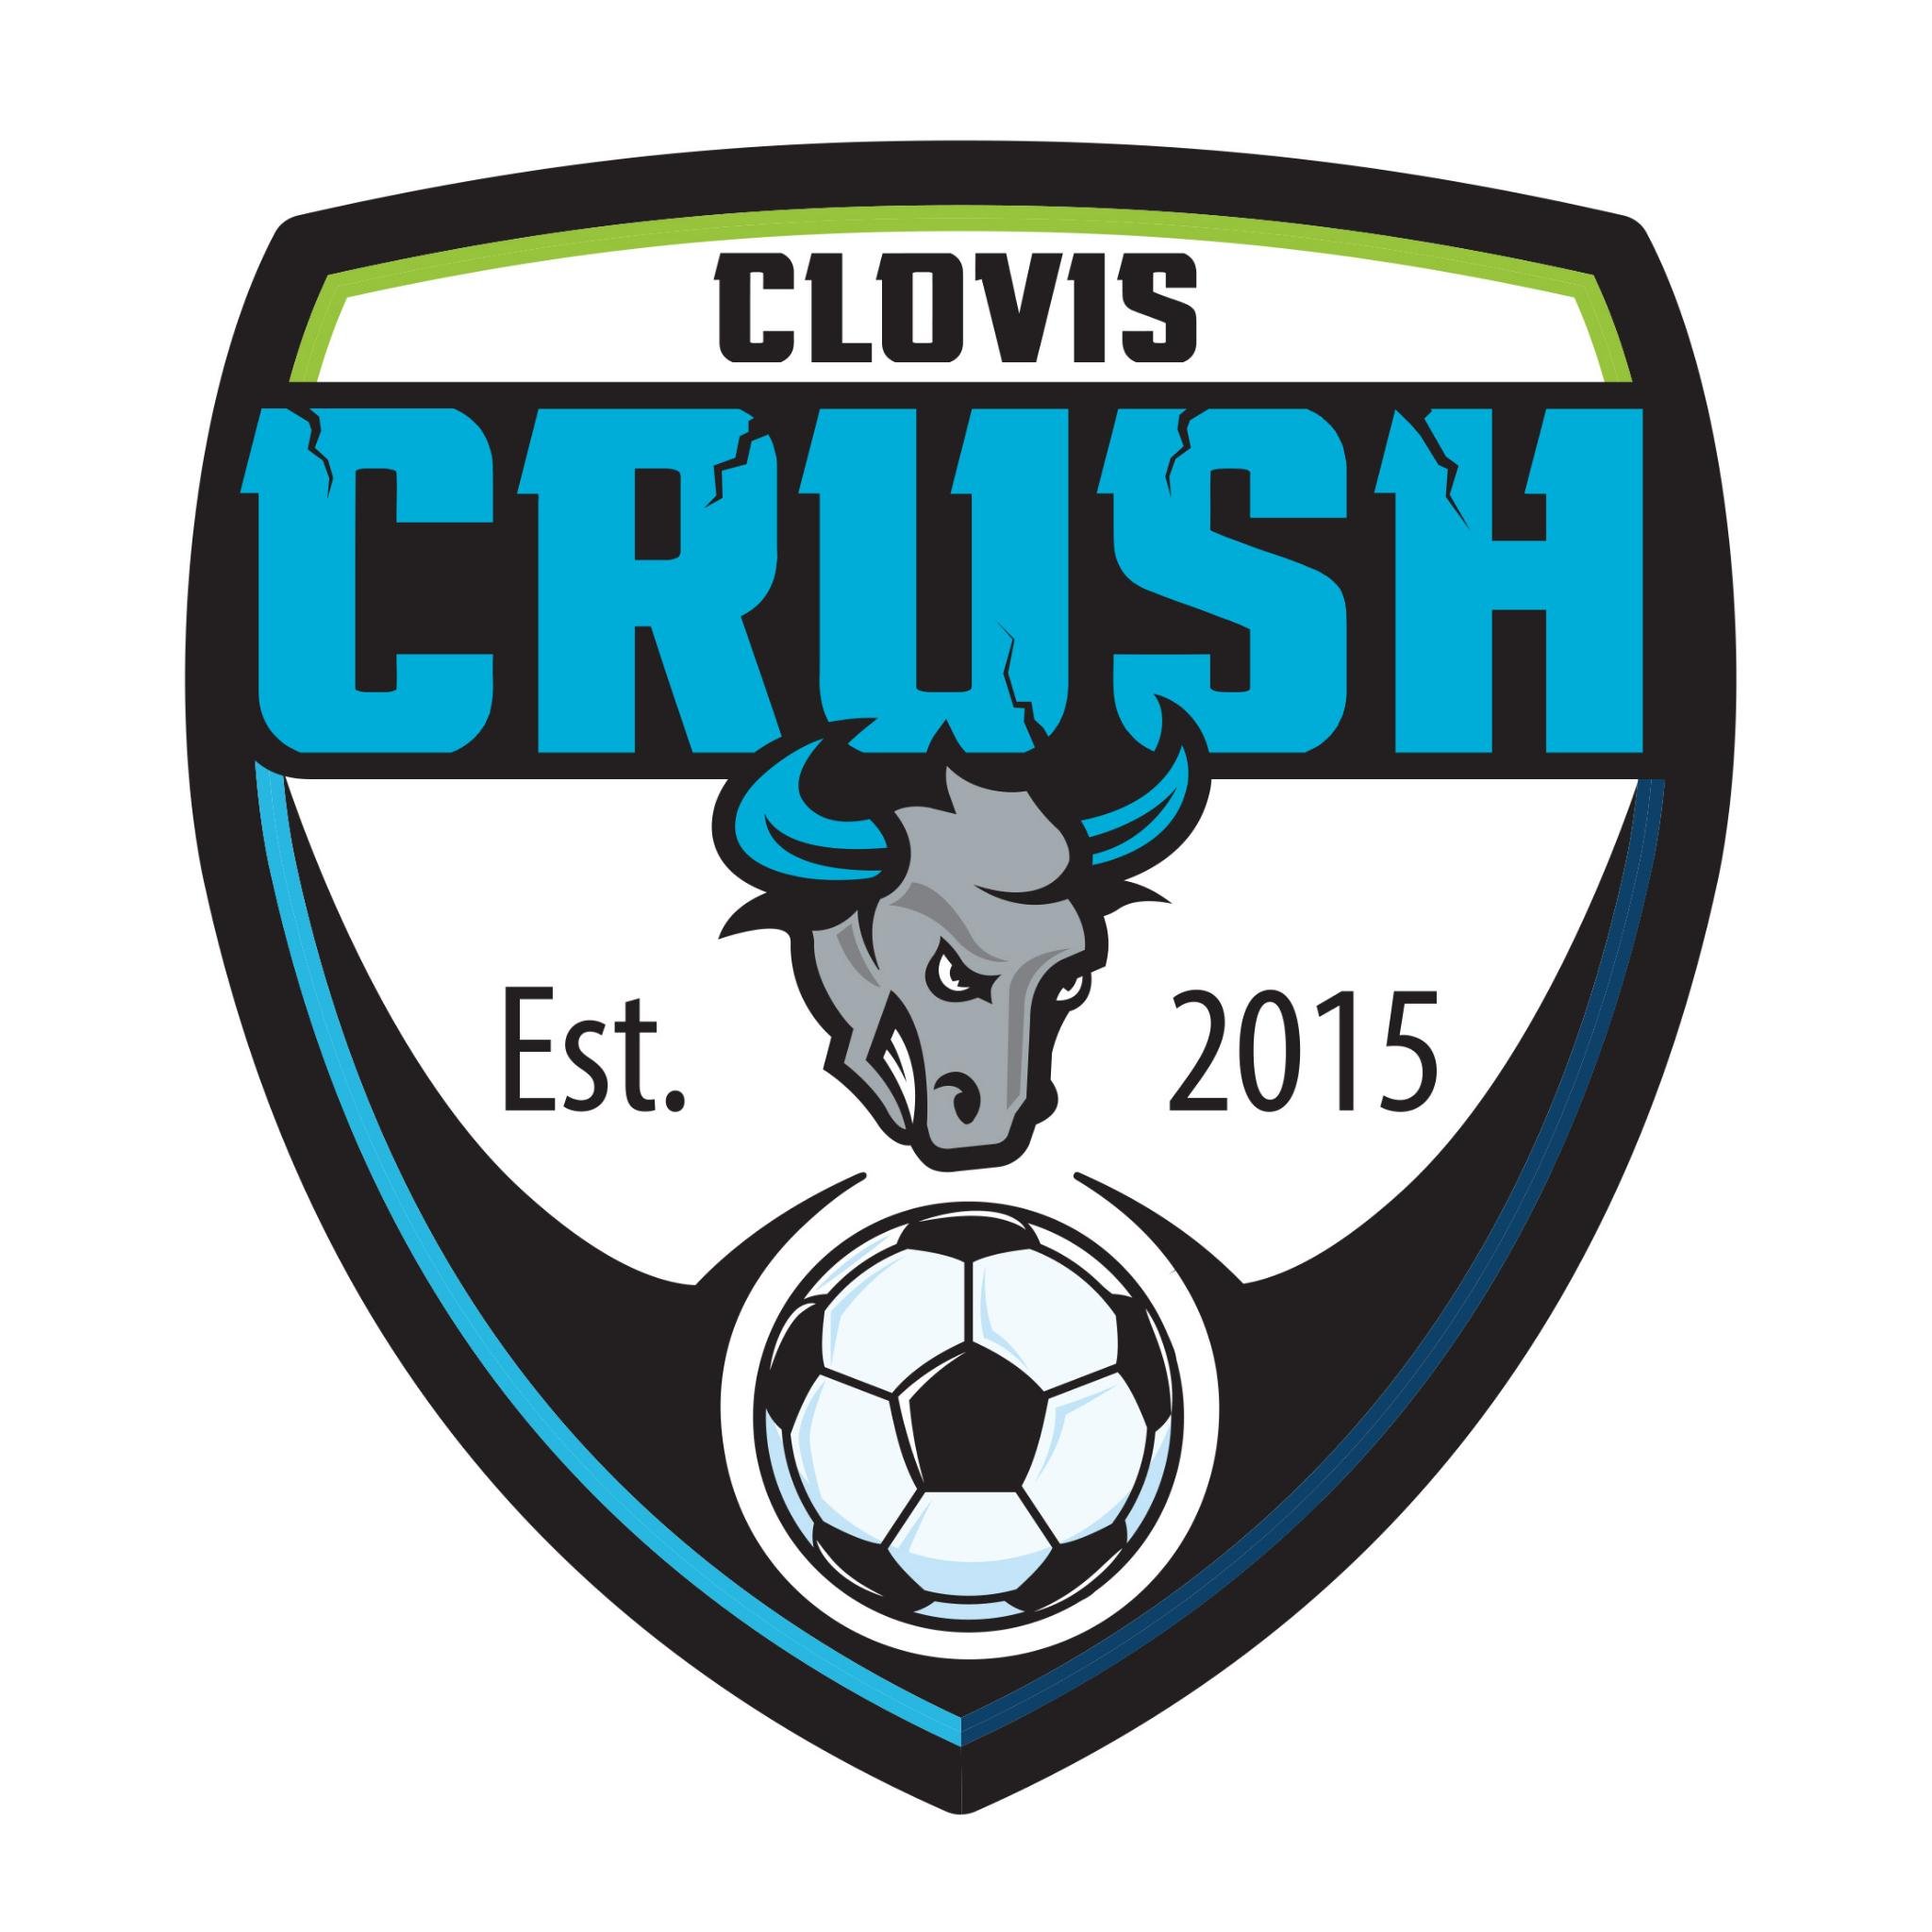 The official account for the Clovis Community College Crush men’s soccer team.